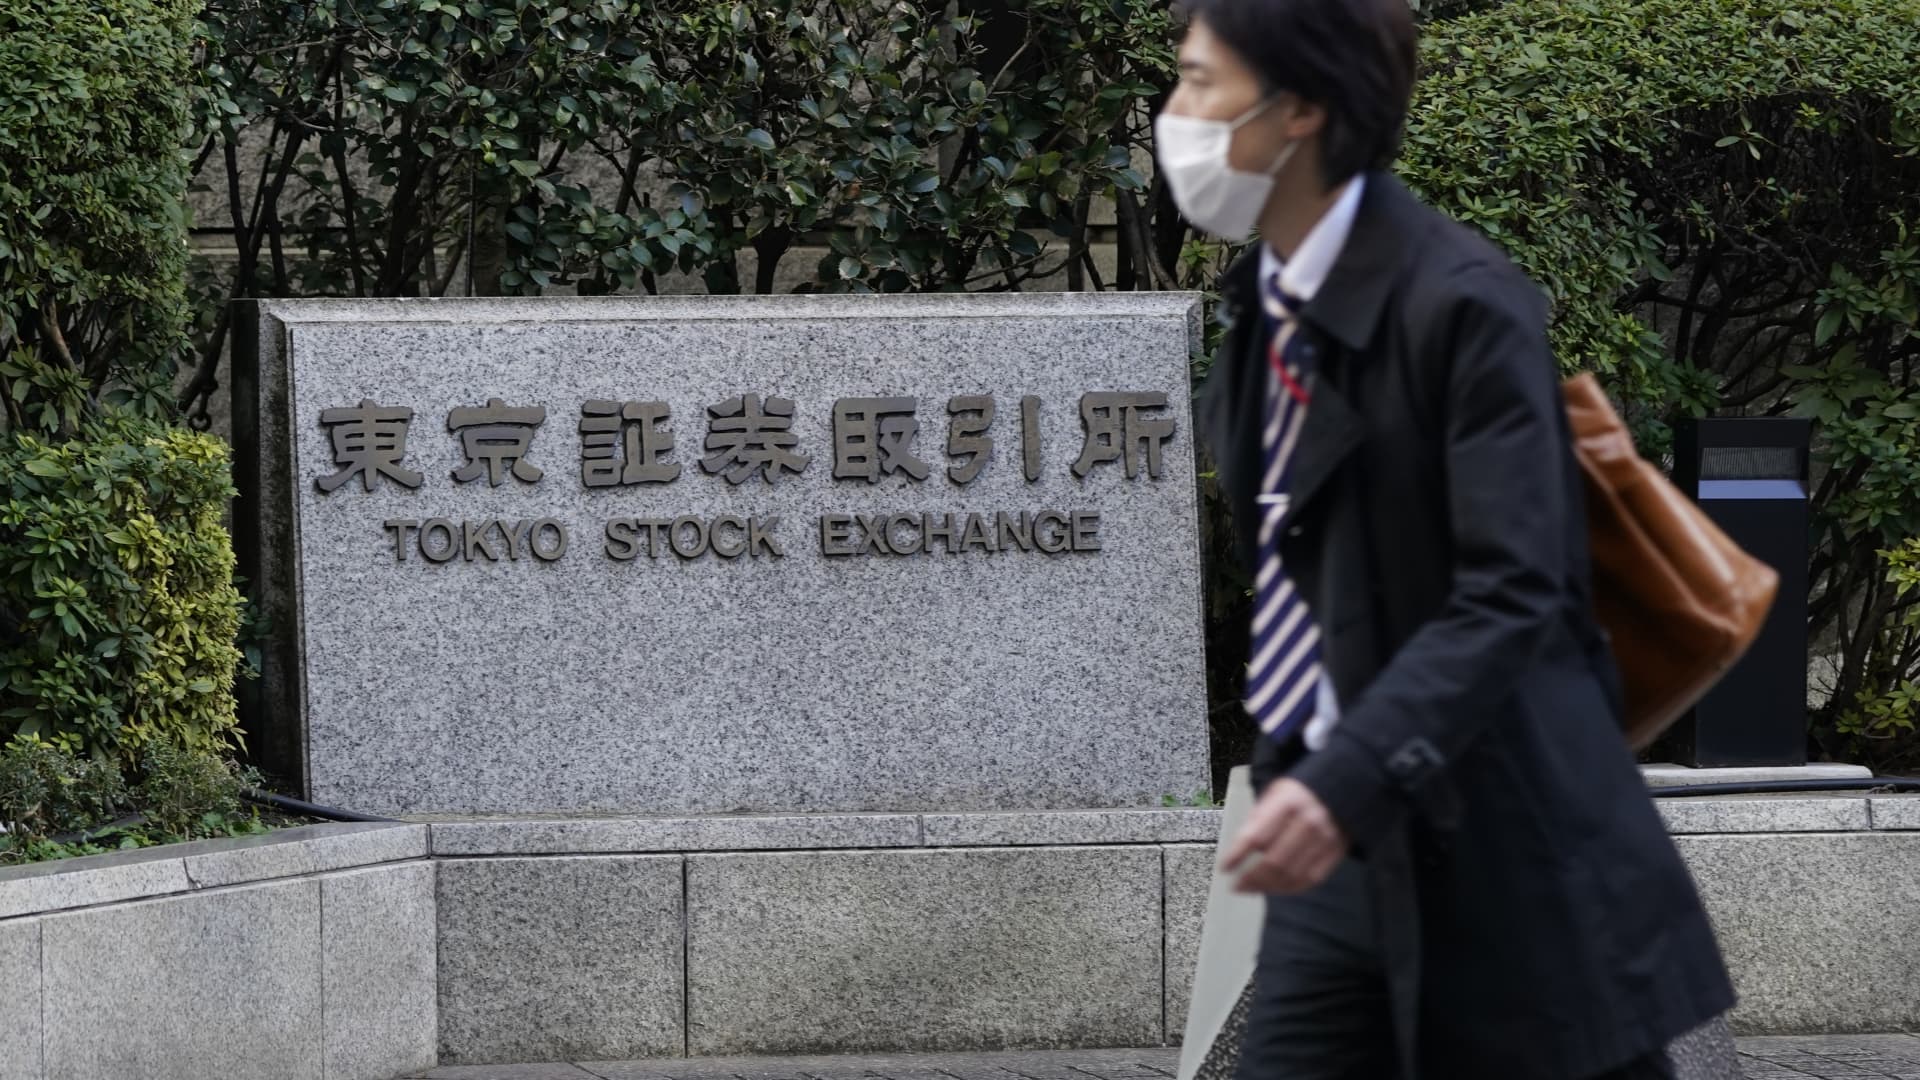 Japan's Nikkei leads losses in mixed Asia markets; SoftBank shares drop 7% after earnings losses